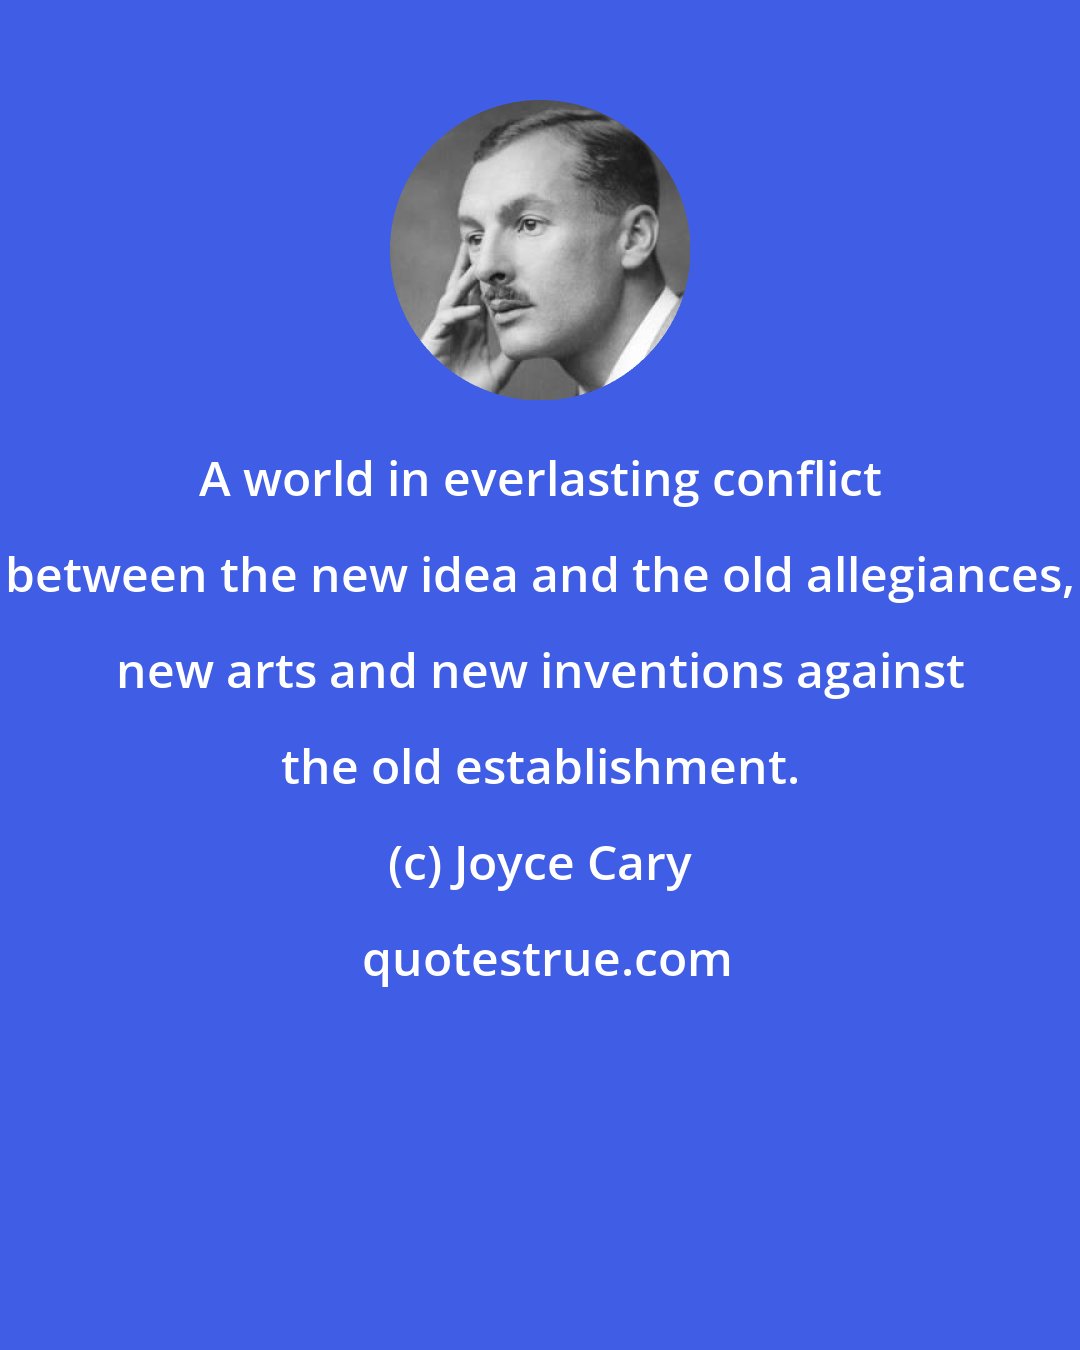 Joyce Cary: A world in everlasting conflict between the new idea and the old allegiances, new arts and new inventions against the old establishment.